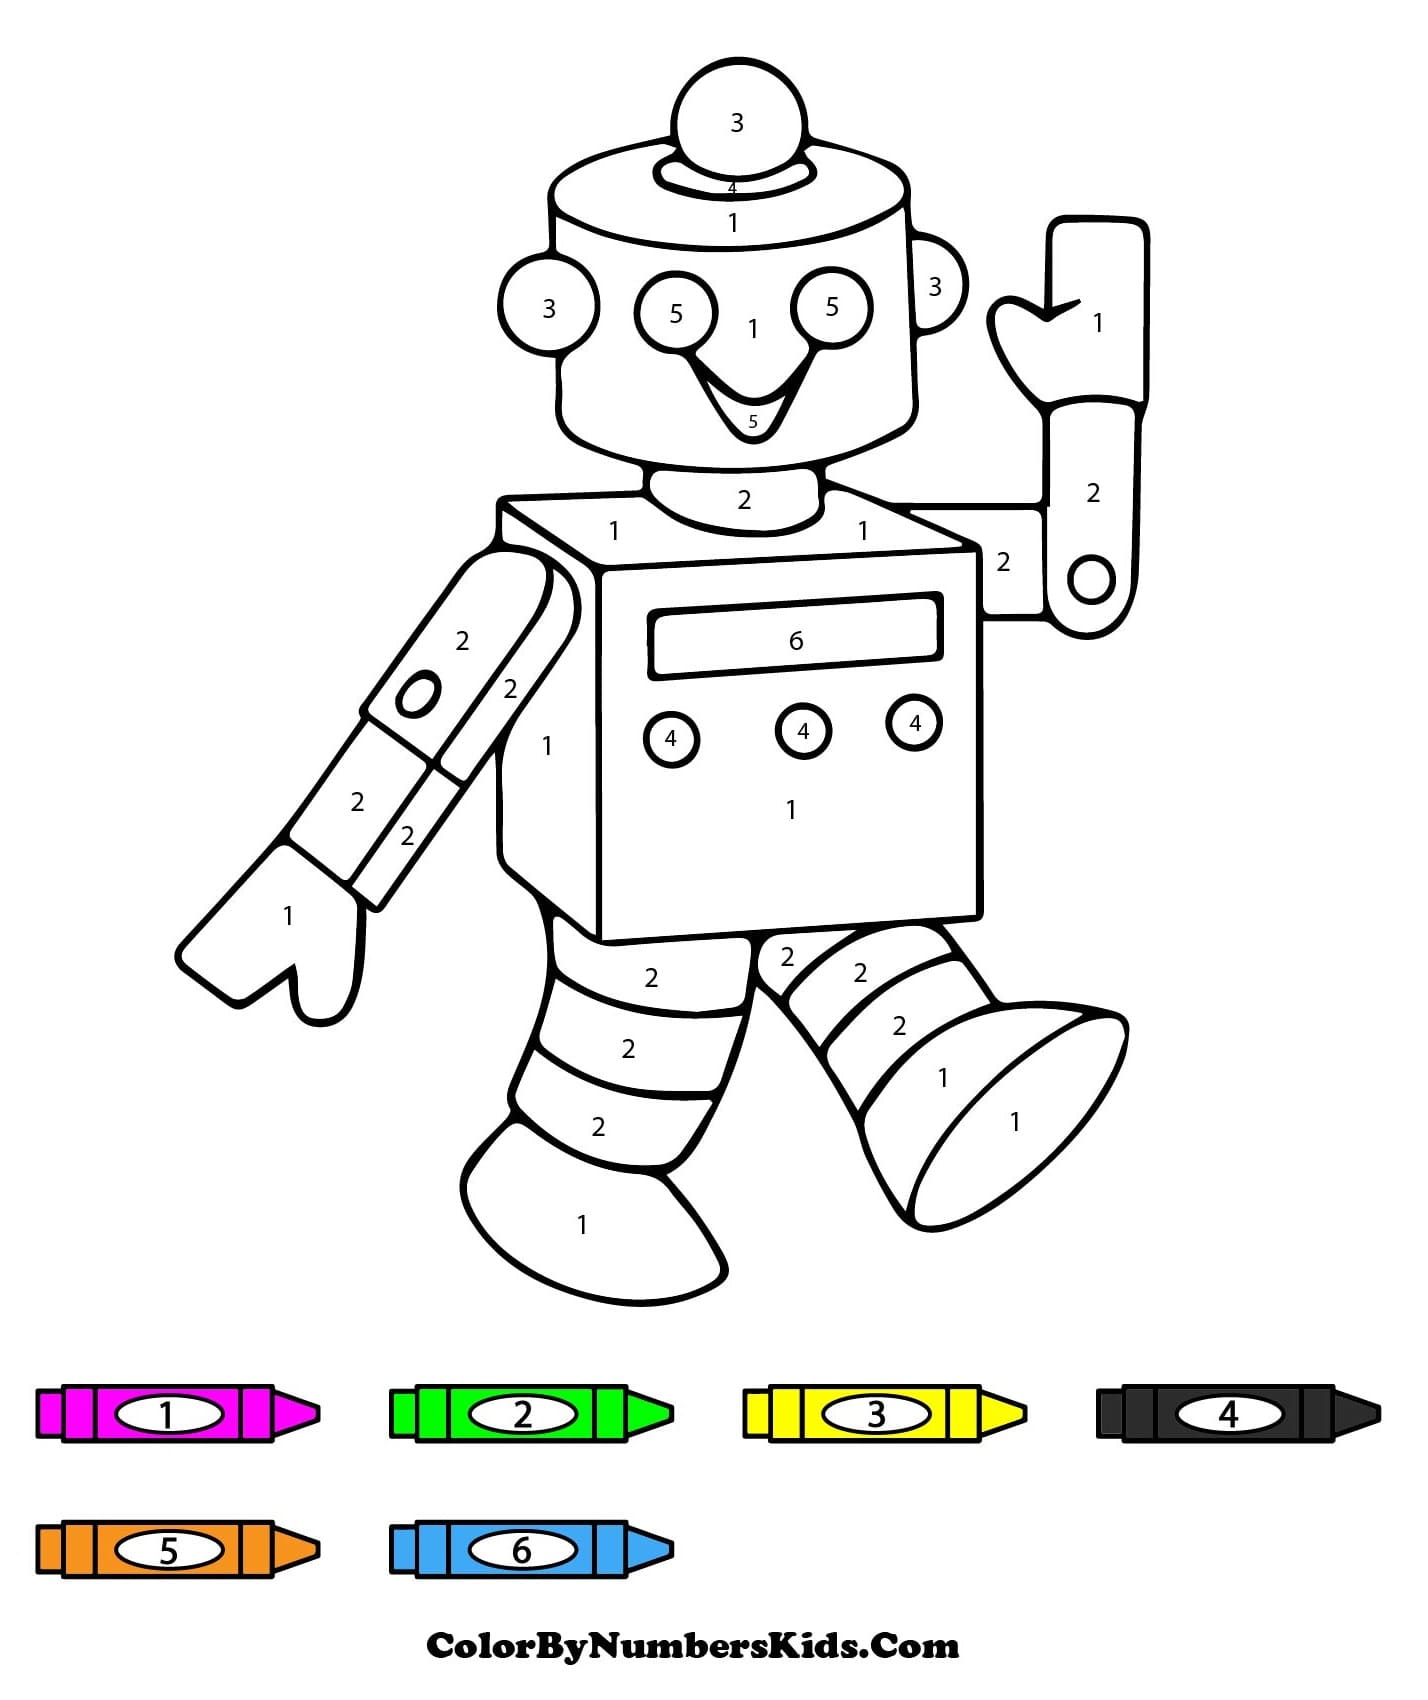 Basic Robot Color By Number